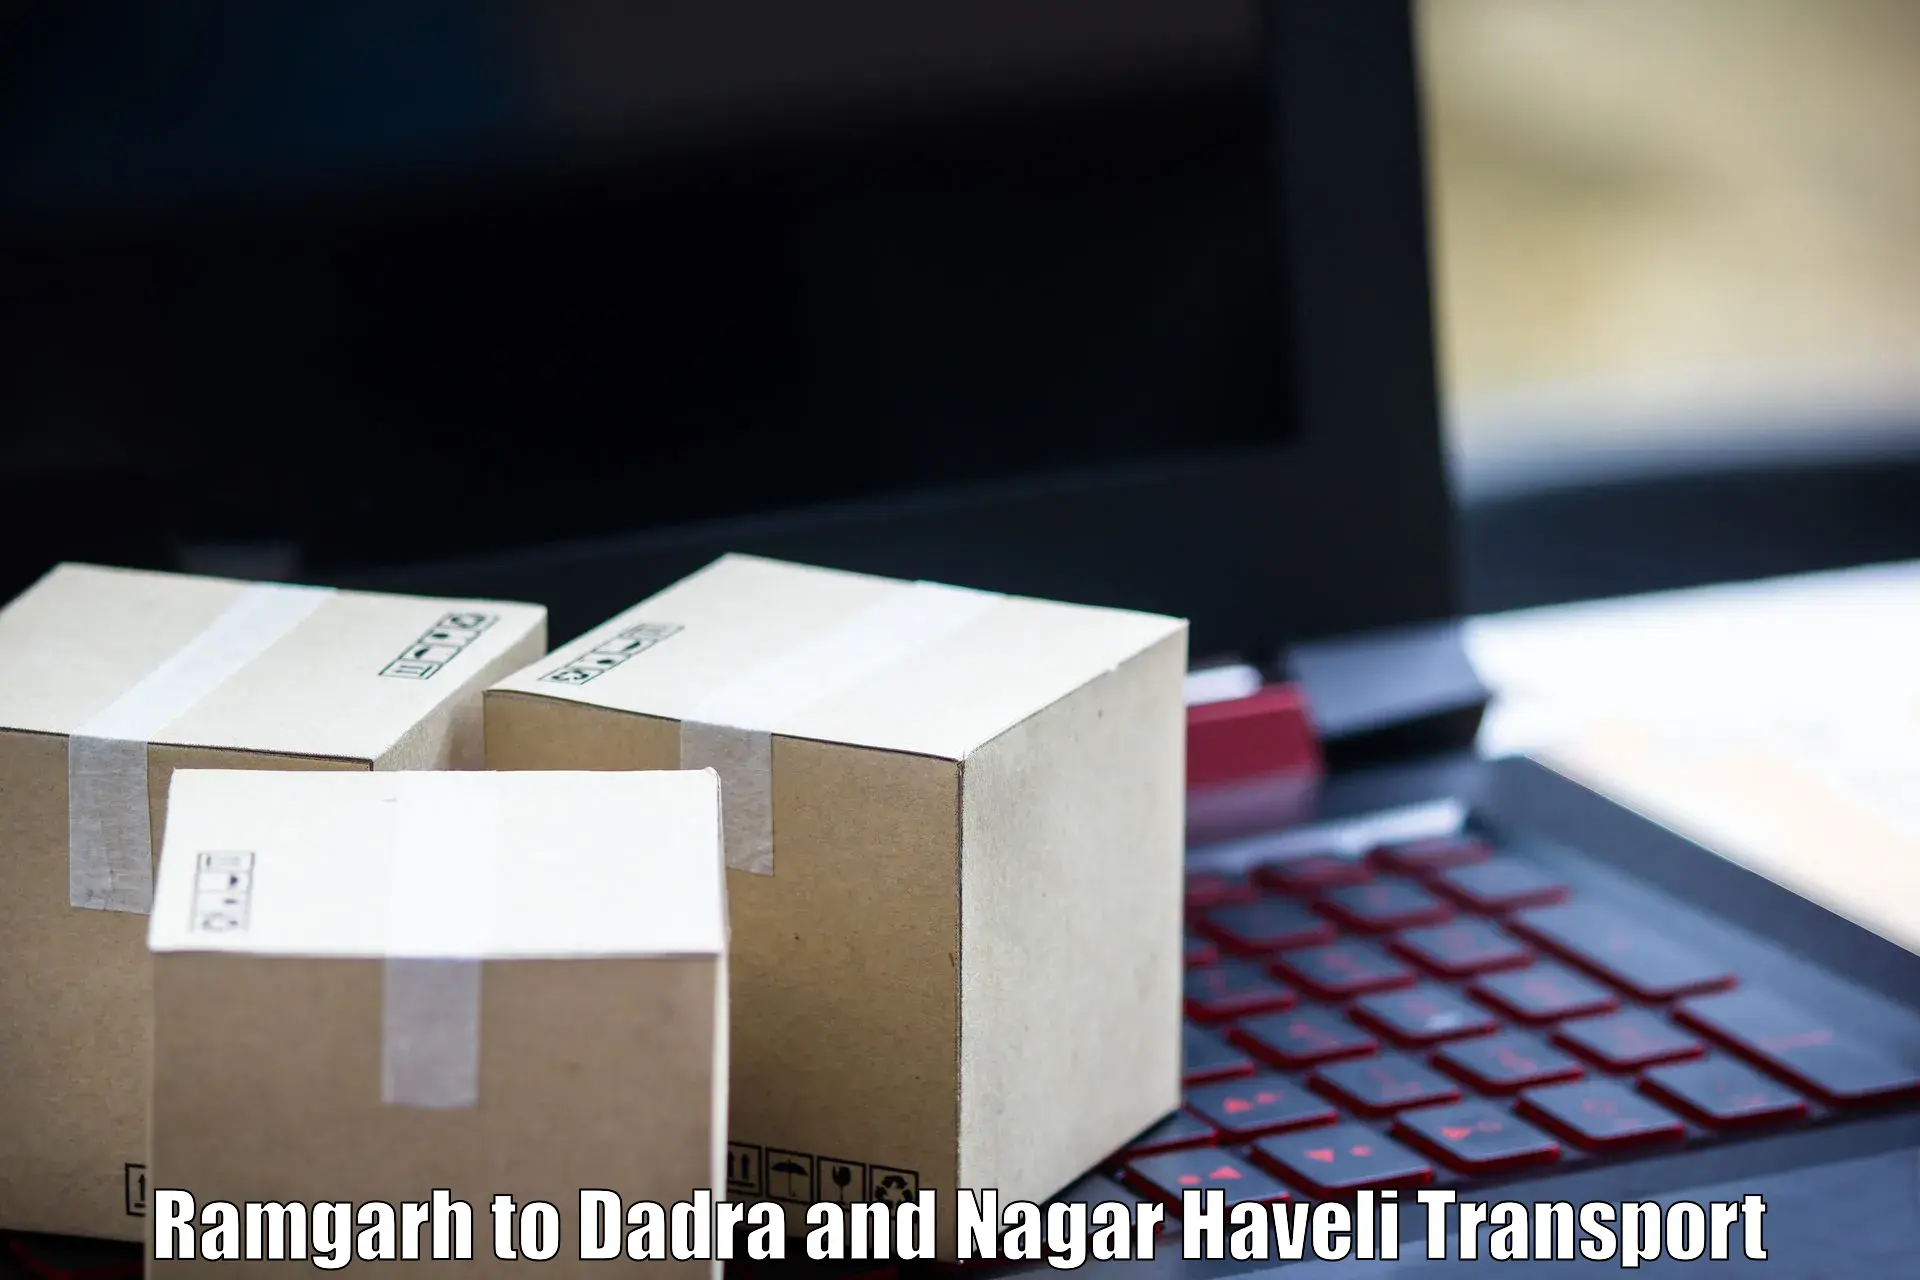 Transport shared services in Ramgarh to Dadra and Nagar Haveli